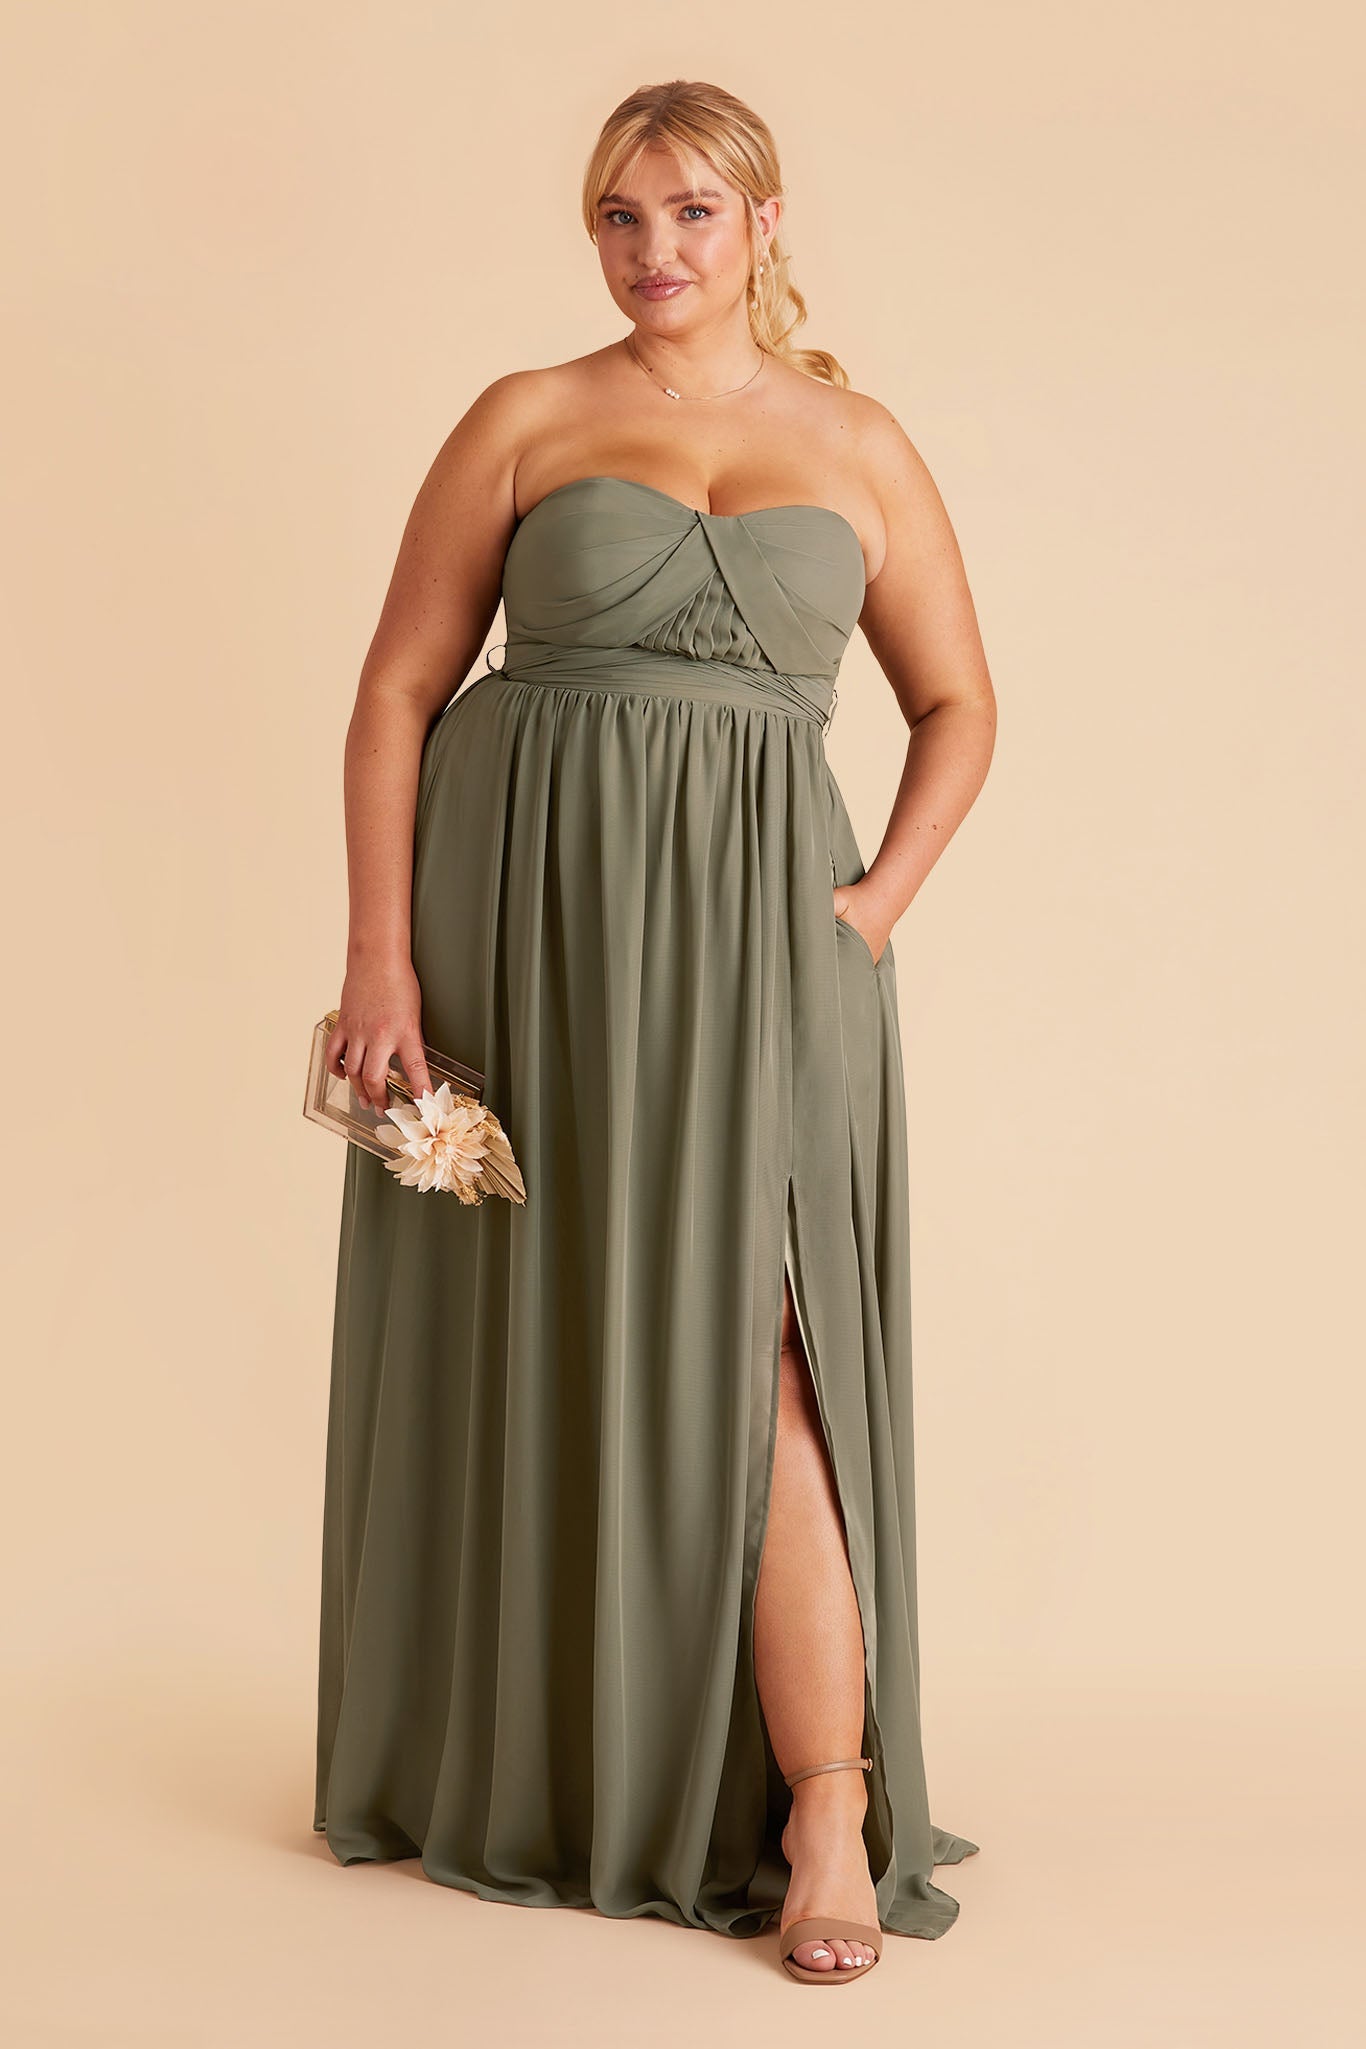 Grace plus size convertible bridesmaid dress in Moss Green Chiffon by Birdy Grey, front view